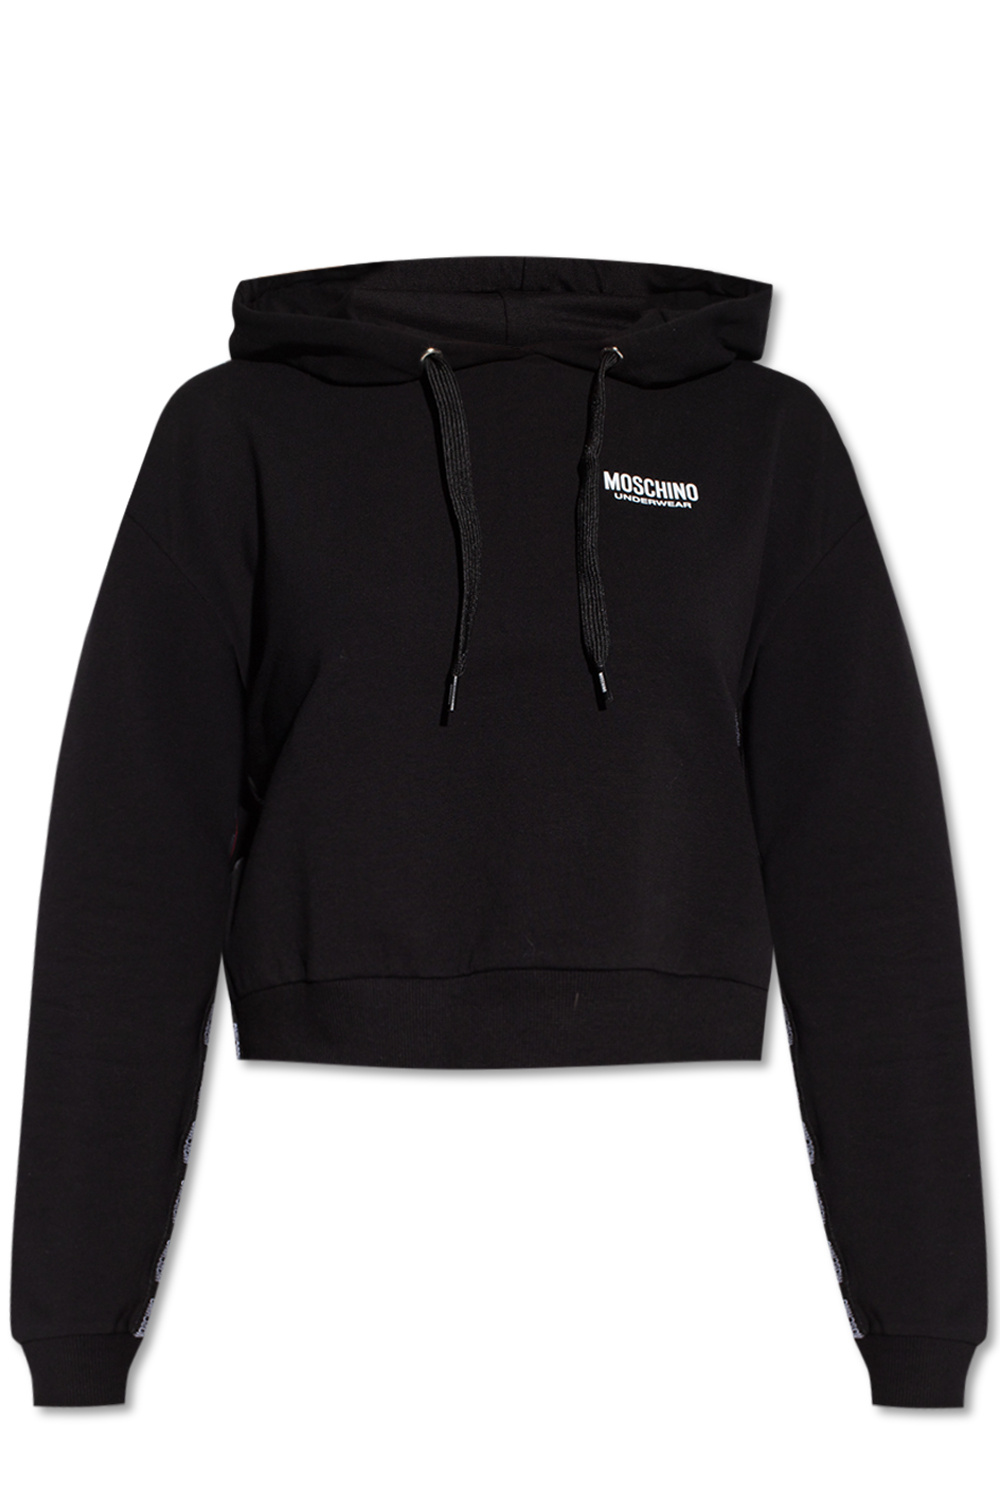 Moschino graphic hoodie with logo